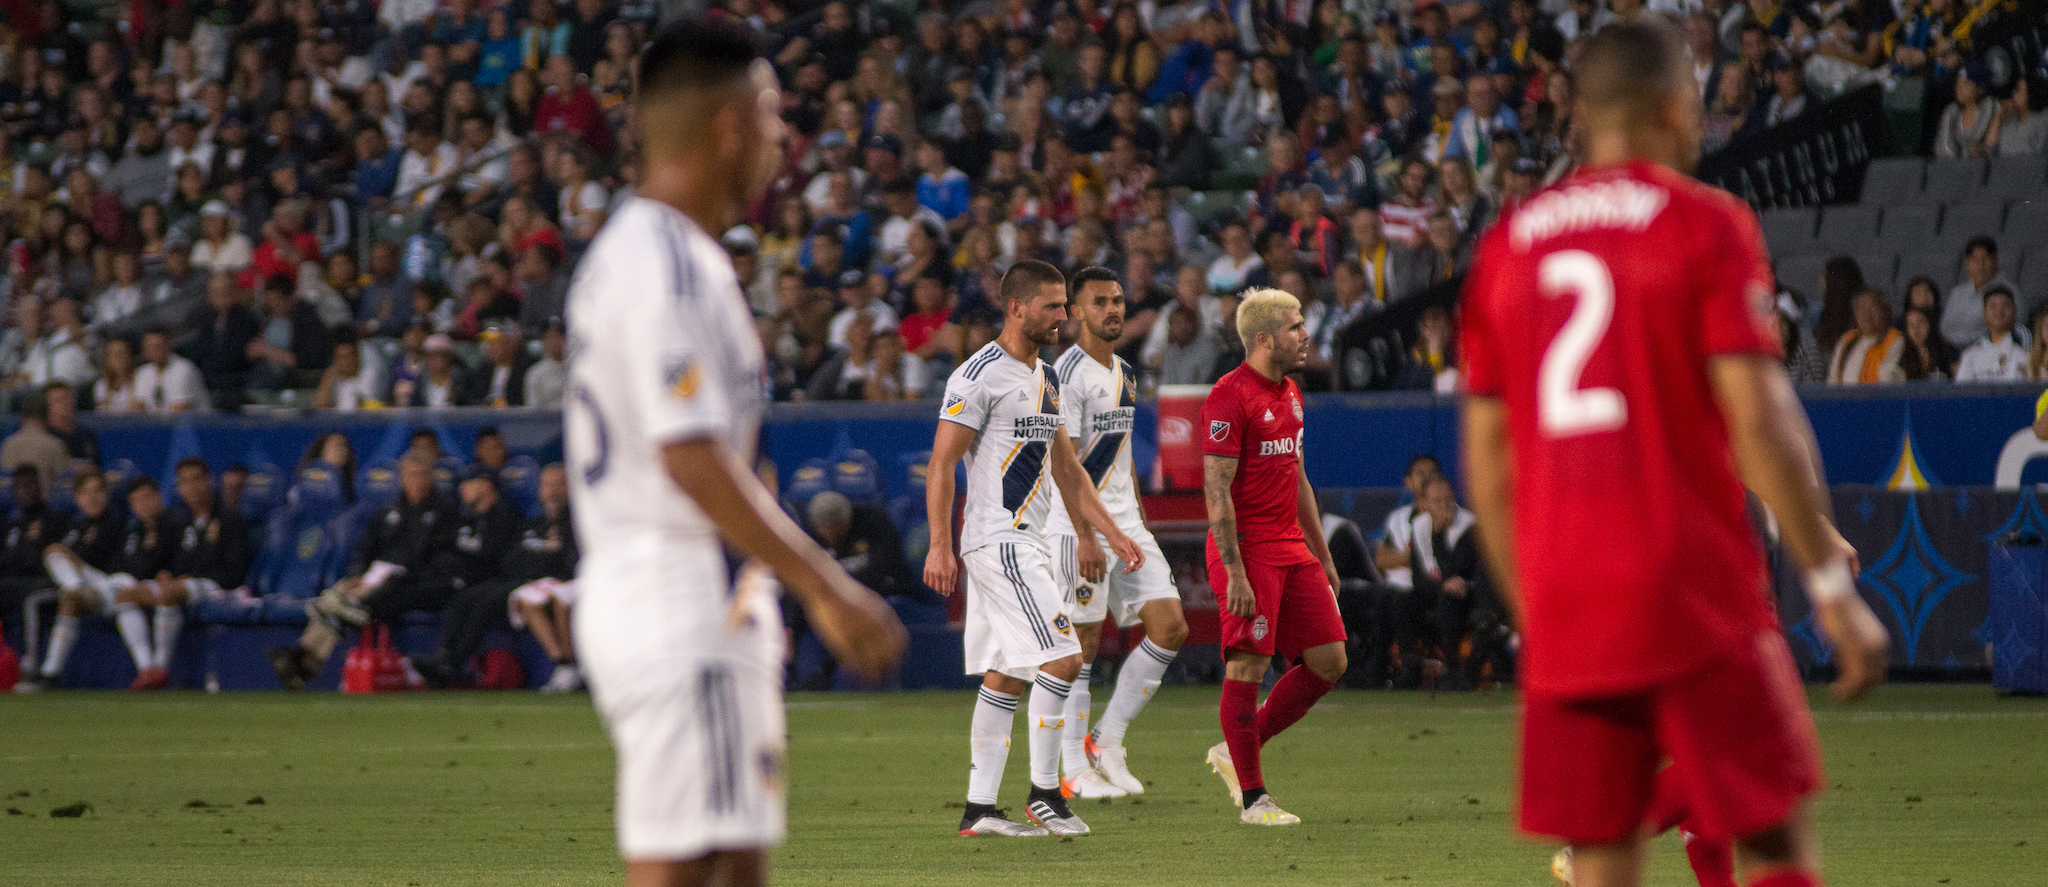 Efrain Alvarez, Perry Kitchen, and Giancarlo Gonzalez all play for the LA Galaxy against Toronto FC on July 4, 2019 -- Photo by Brittany Campbell